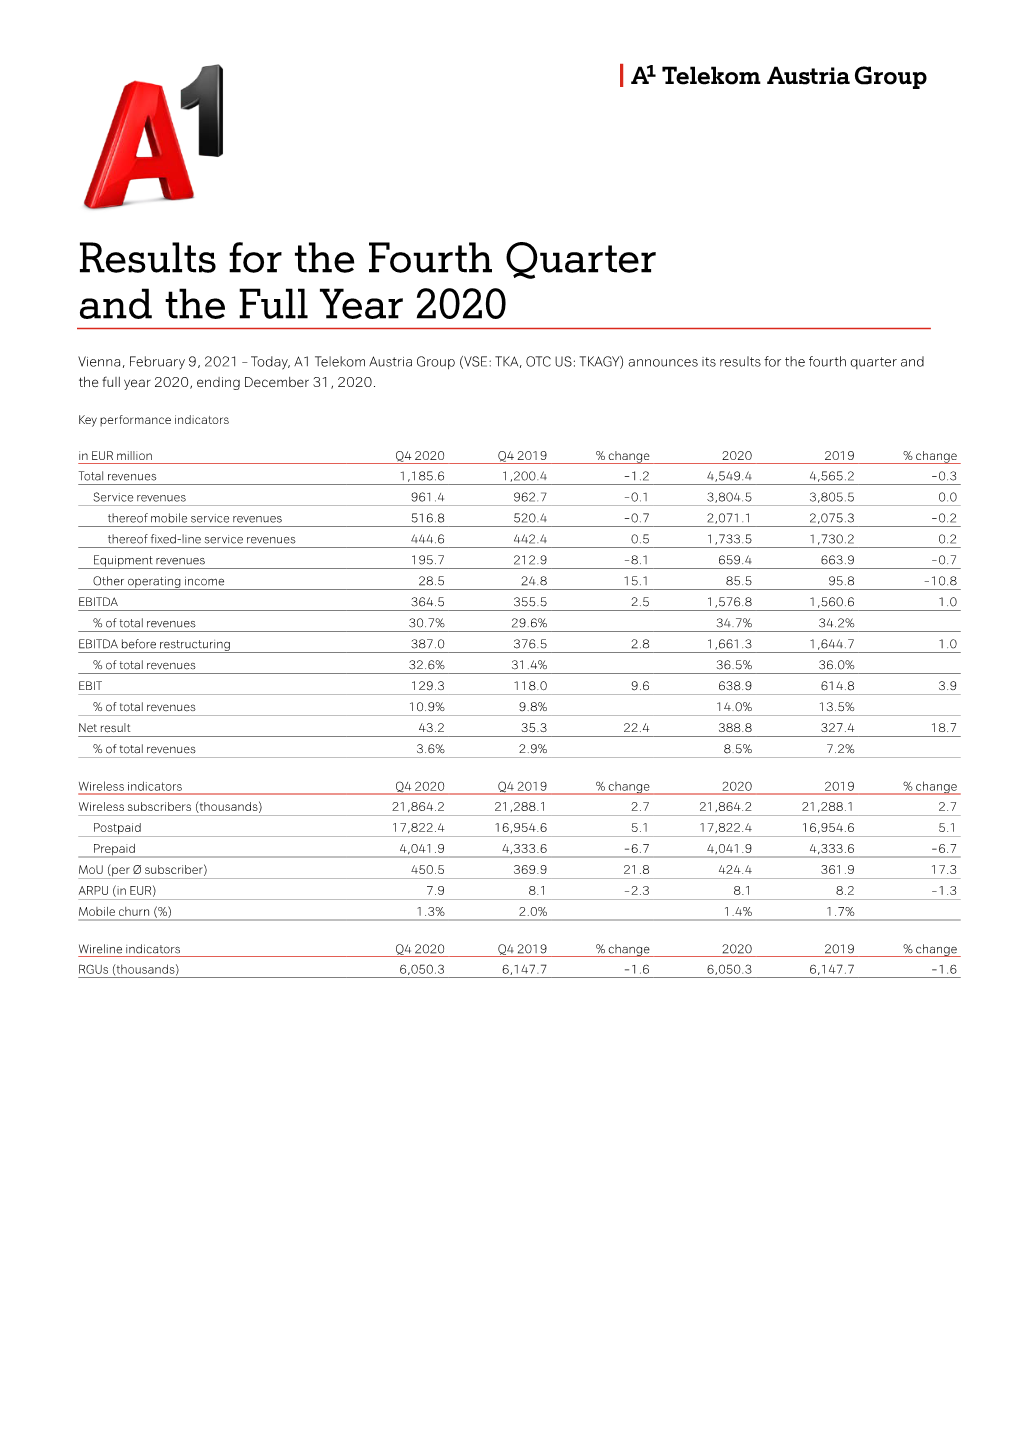 Results for the Fourth Quarter and the Full Year 2020